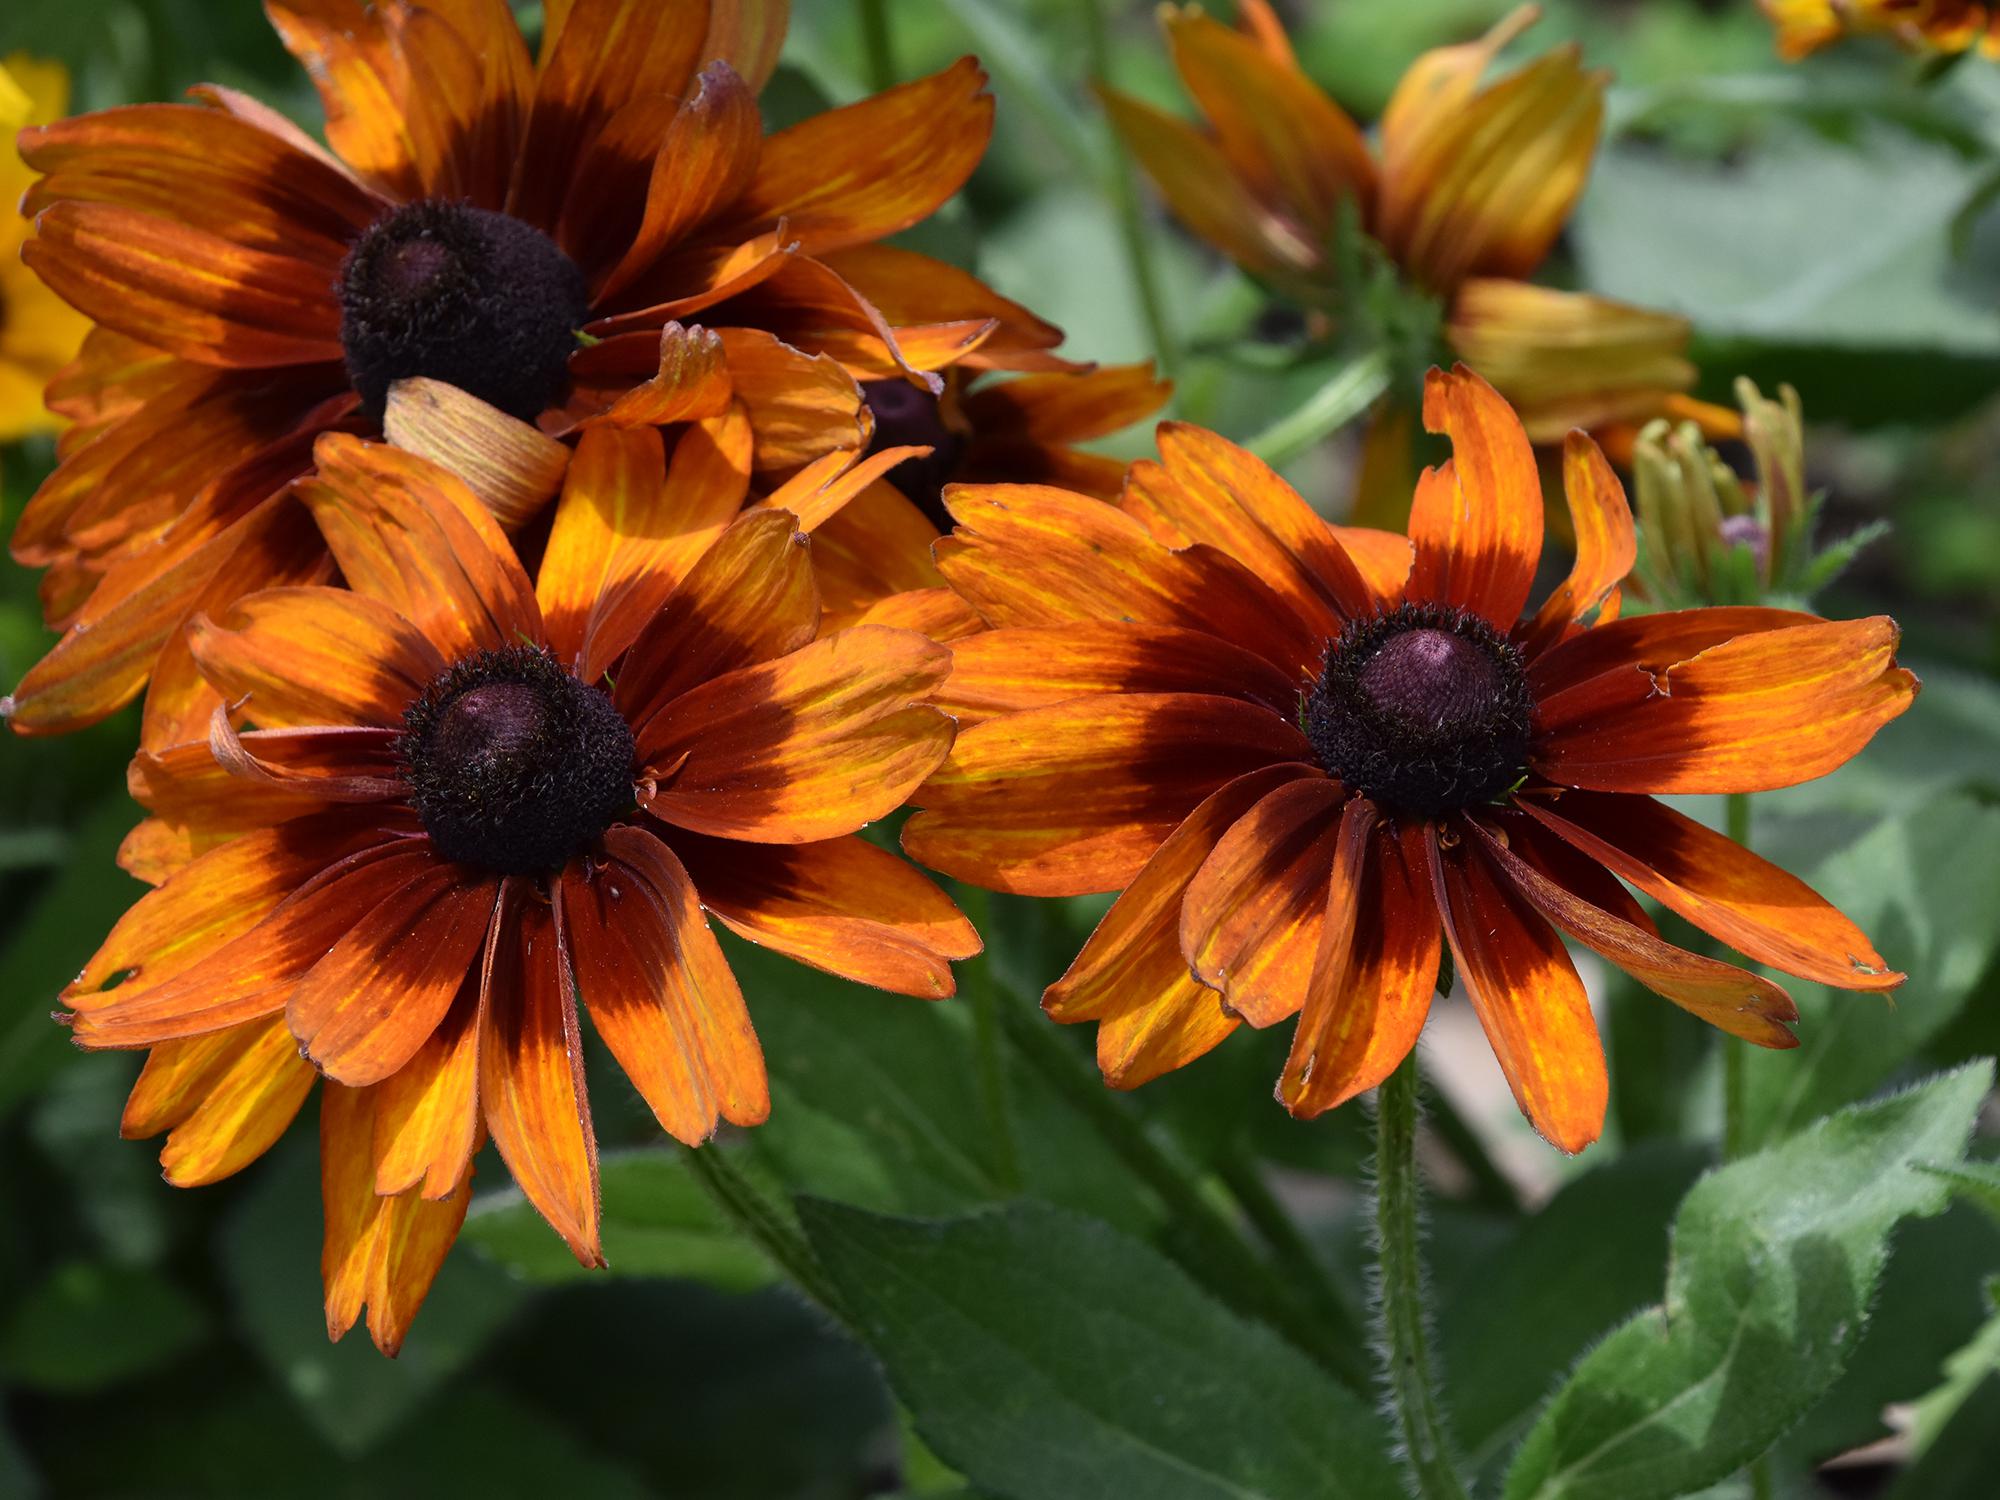 Cherokee Sunset produces large flowers that are a mix of single and doubles. The warm, autumnal colors on sturdy stems make them a good choice for use in fall indoor arrangements. (Photo by MSU Extension/Gary Bachman)